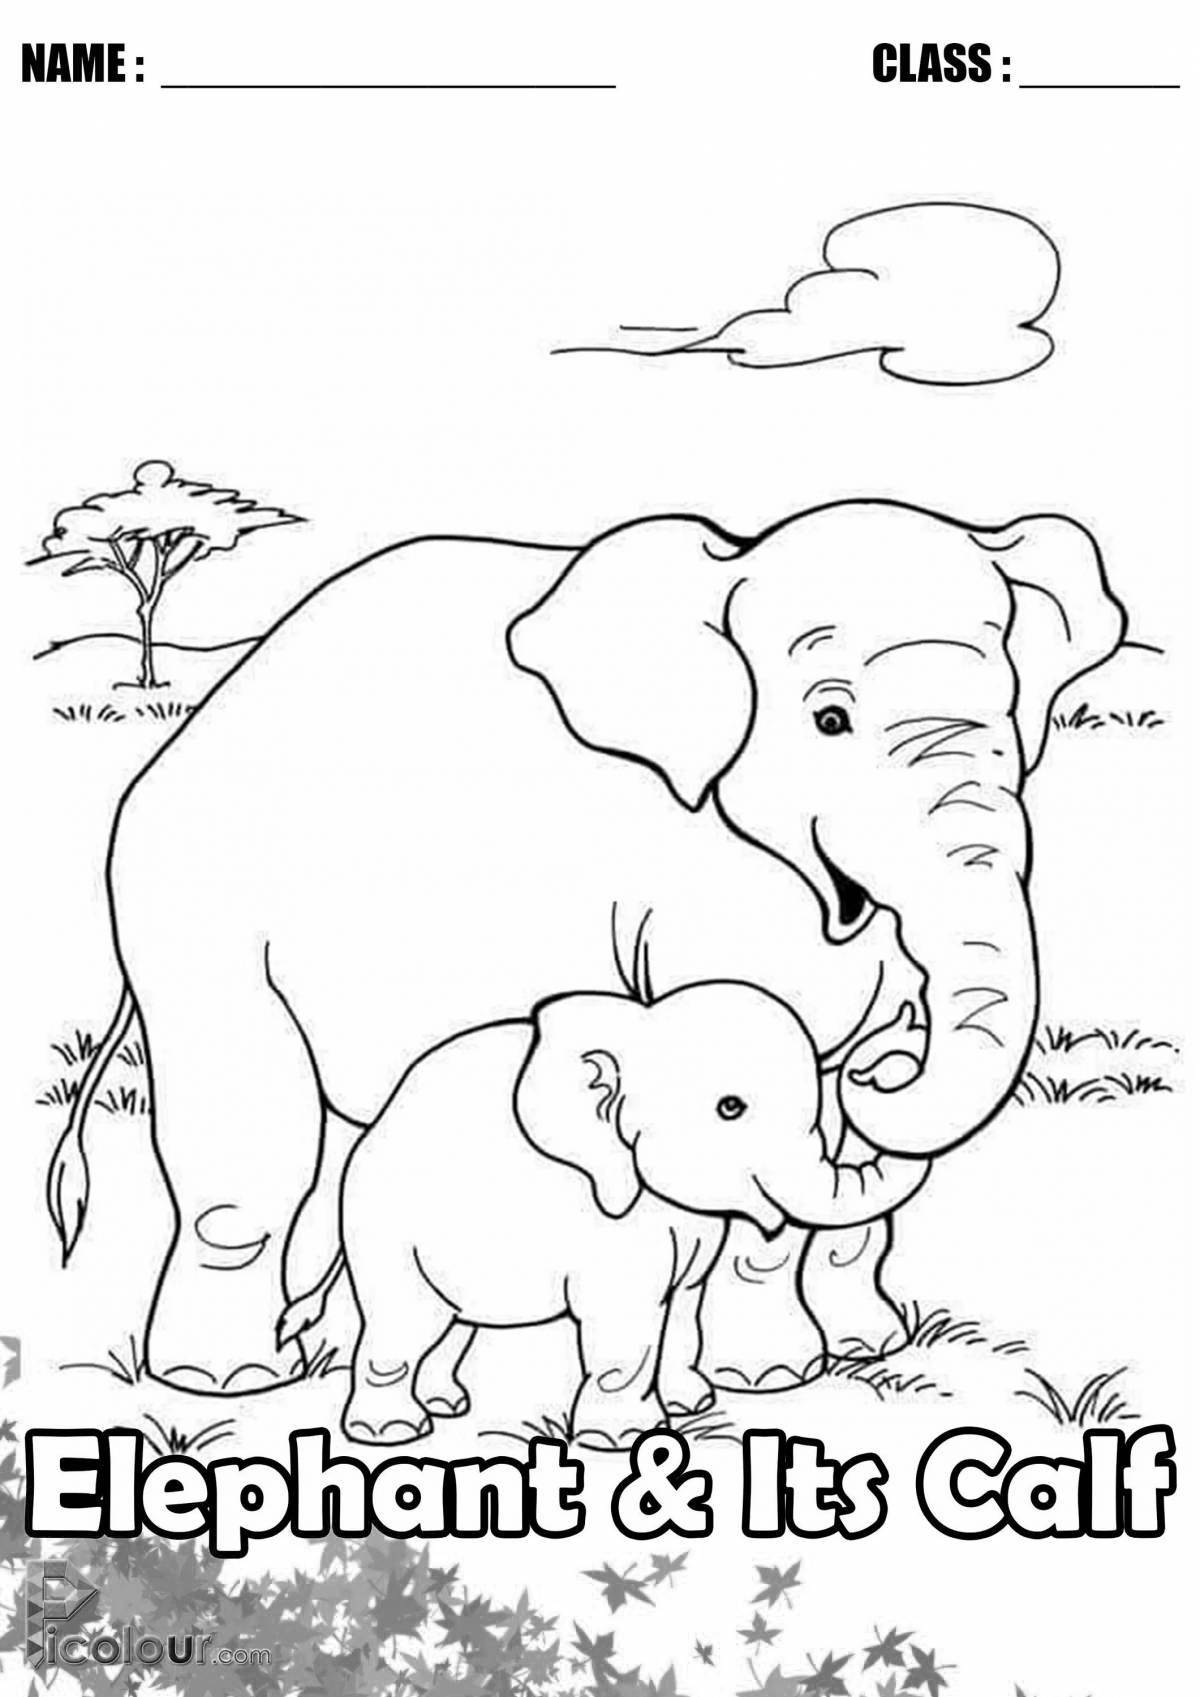 Vibrant zoo animal coloring page